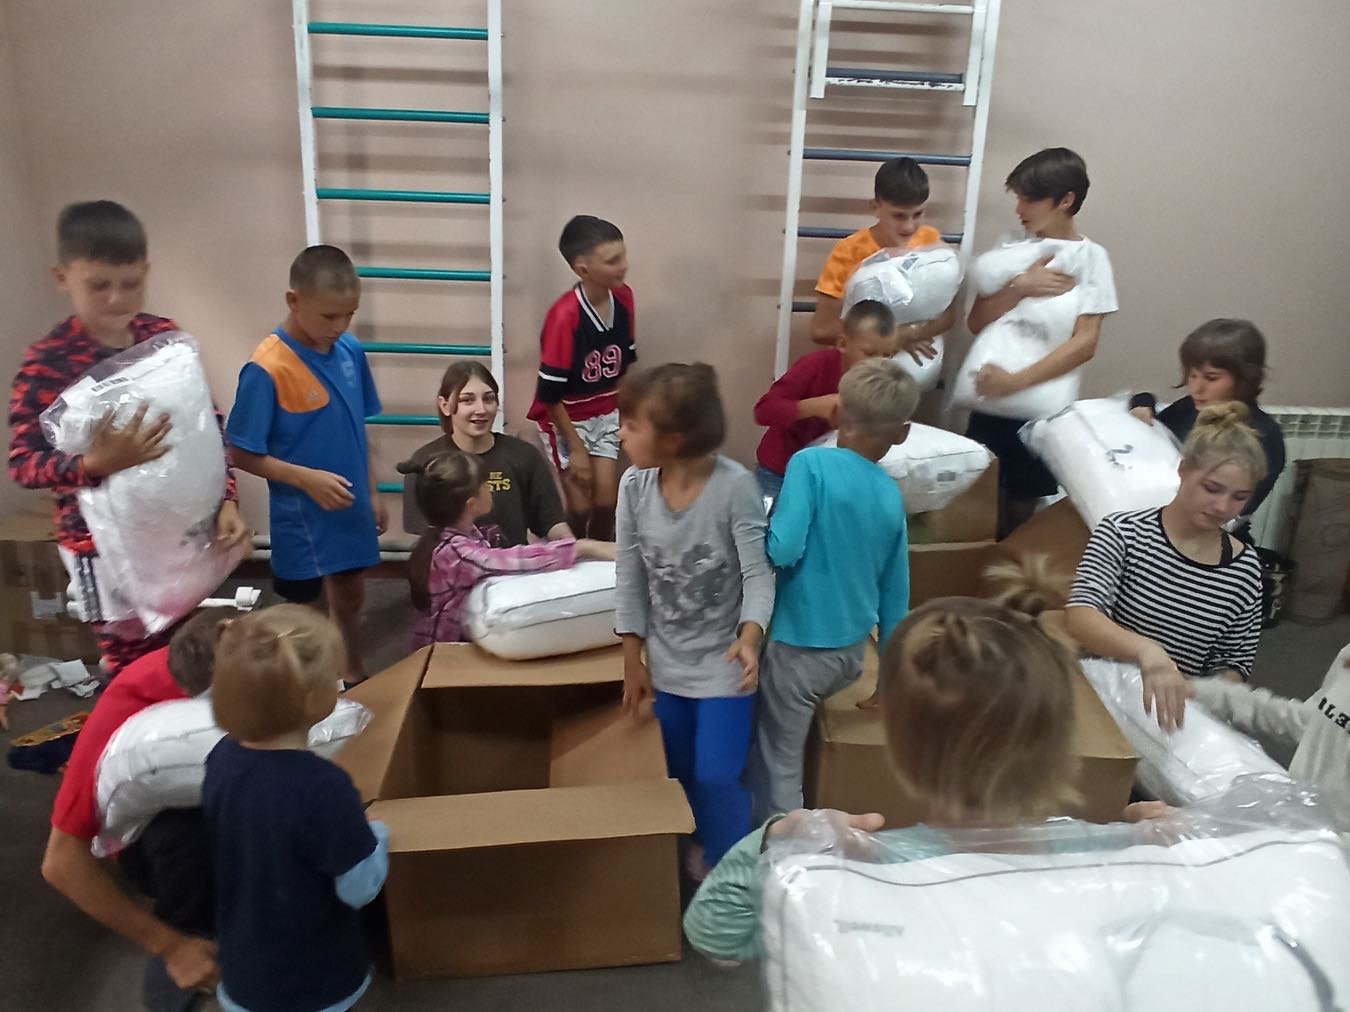 A group of children are standing in a room with boxes.